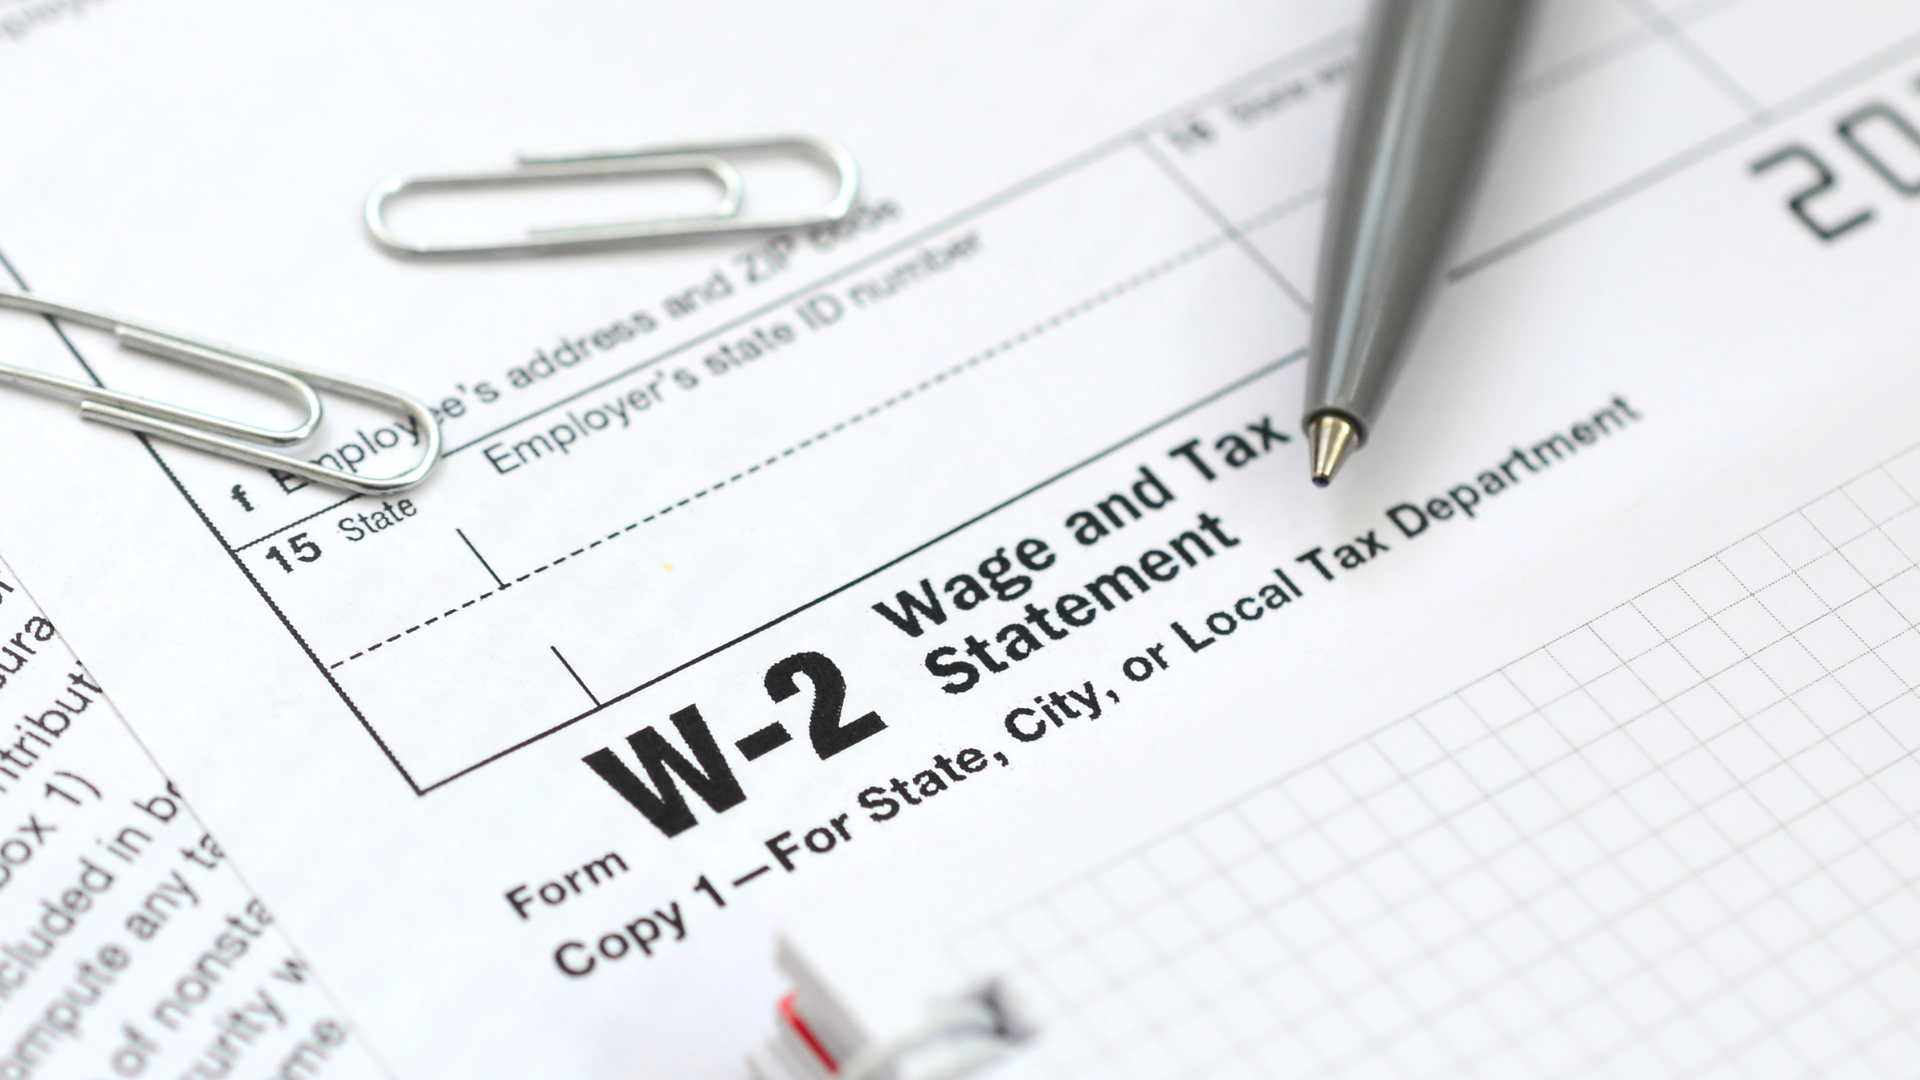 W-2 Wage and Tax Statement form